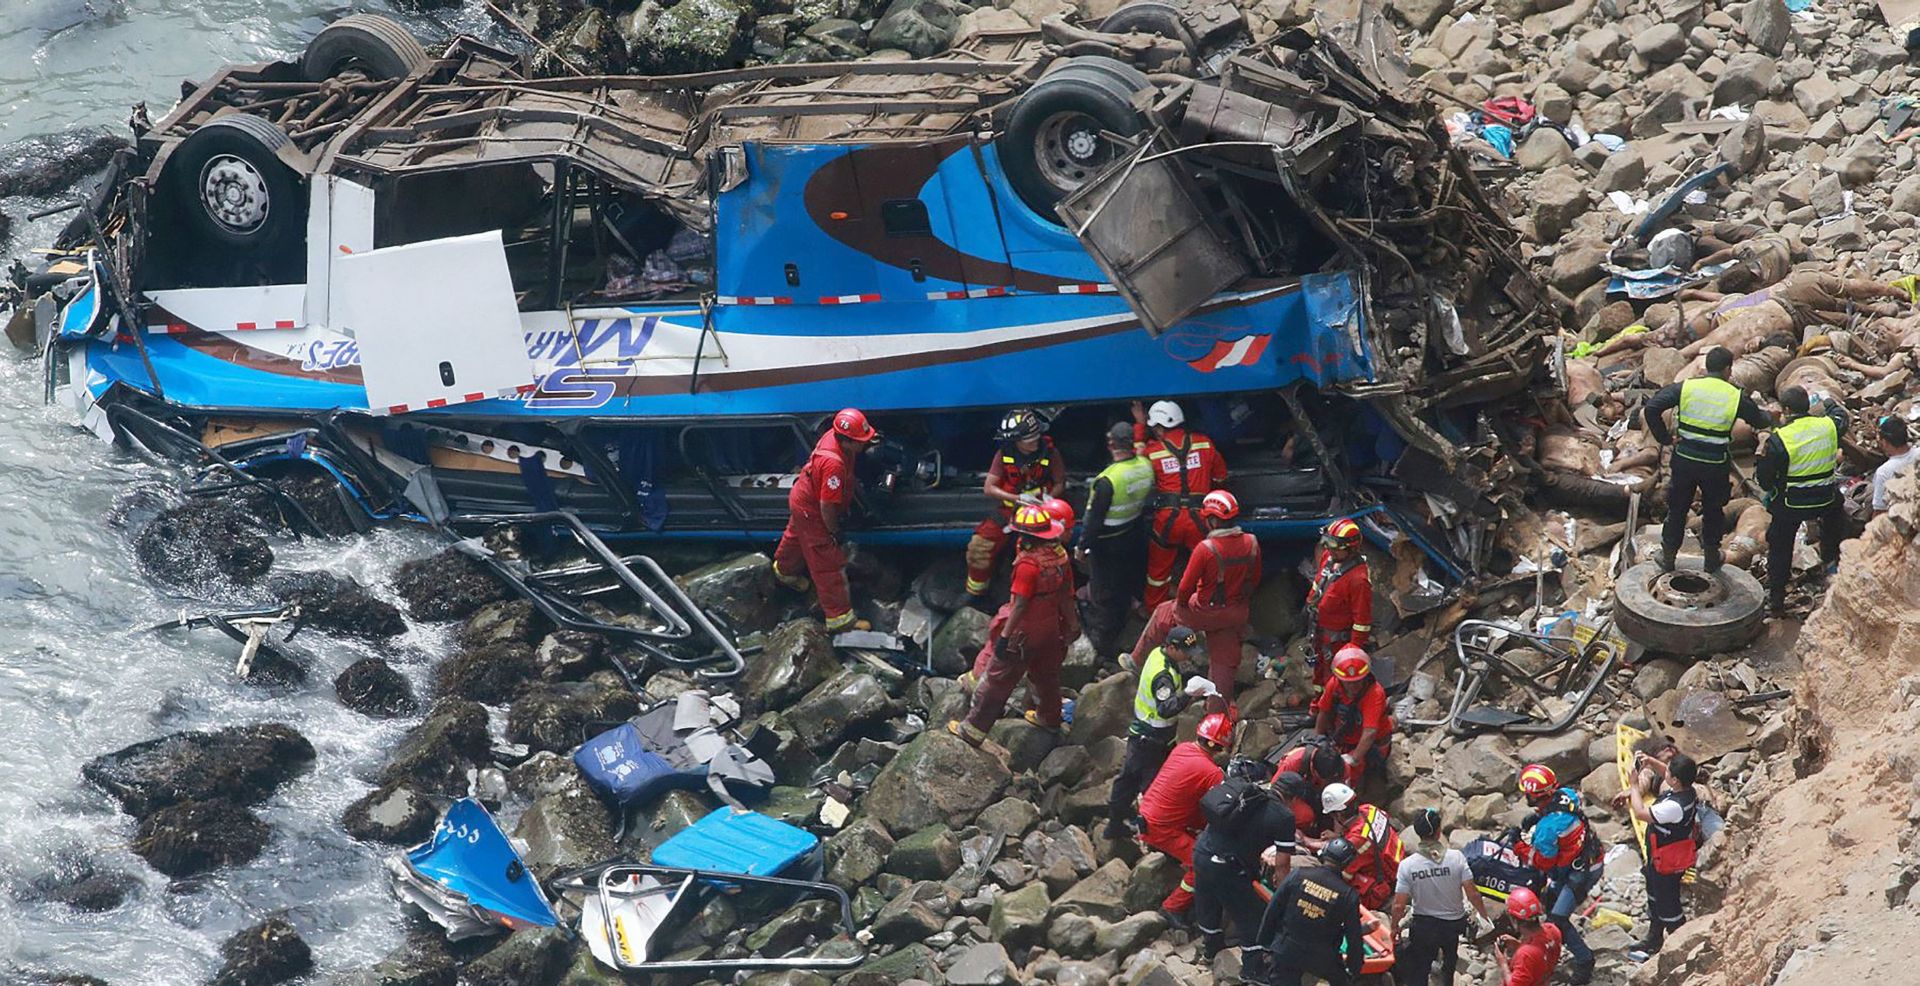 epa06413851 A handout photo made available by Agencia Andina shows a group of emergency personnel  working to rescue victims after a passenger bus plunged off the Pan-American Highway North, about 45 kilometers from Lima, Peru, 02 January 2018. At least 25 people died and 30 injured after a passenger bus plunged off a cliff by the sea in an area known as Pasamayo, in northern Lima, officials said.  EPA/Vidal Tarqui / HANDOUT  HANDOUT EDITORIAL USE ONLY/NO SALES